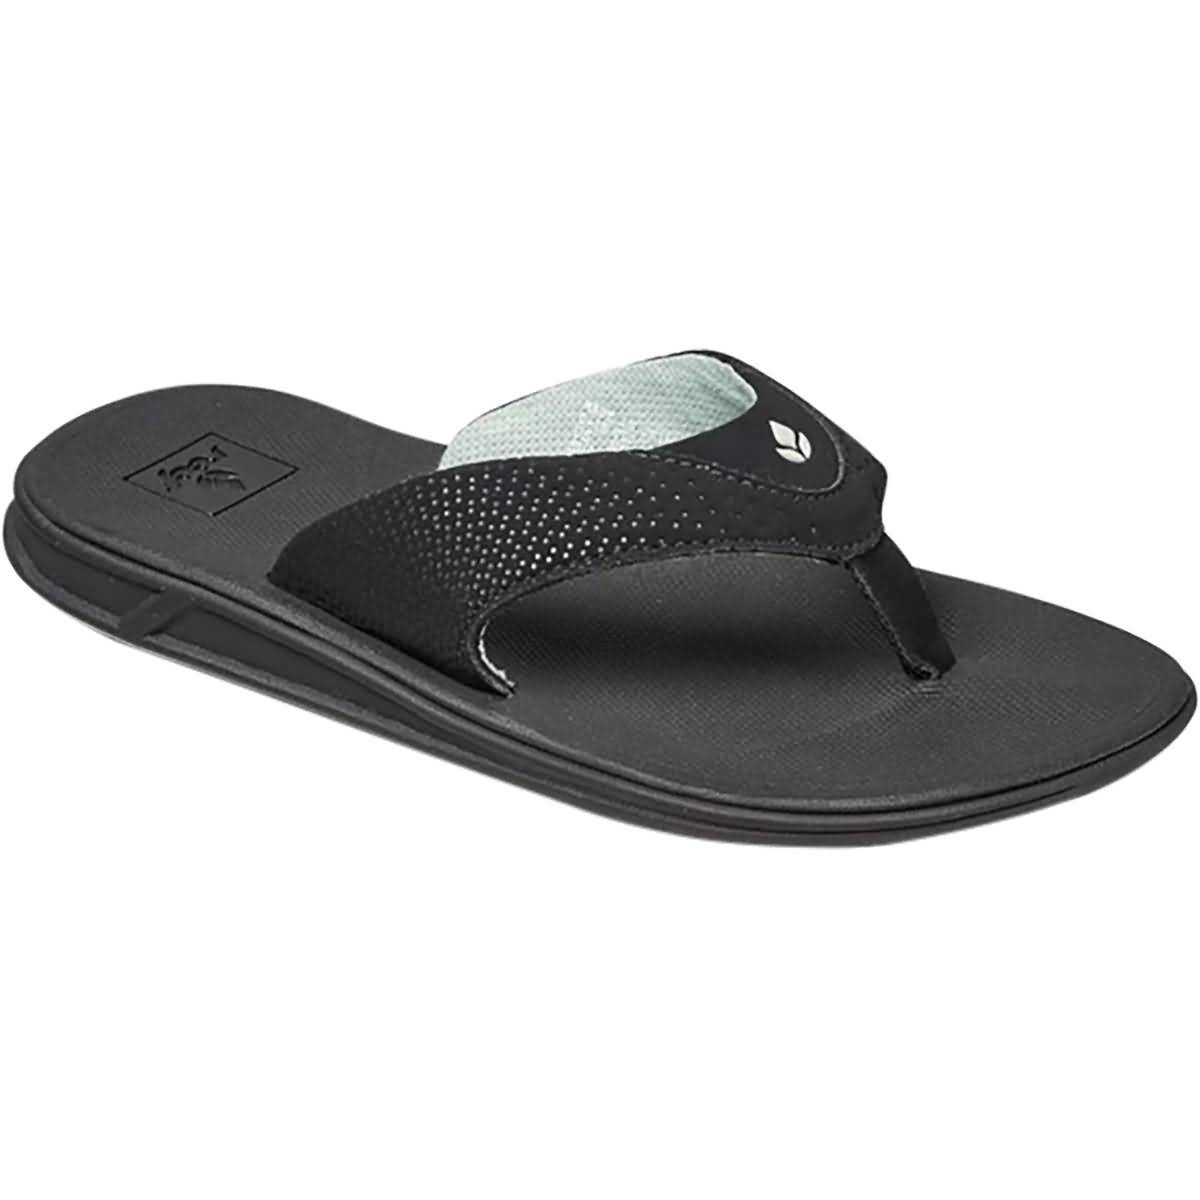 REEF® Sandals, Shoes, Boots & Apparel